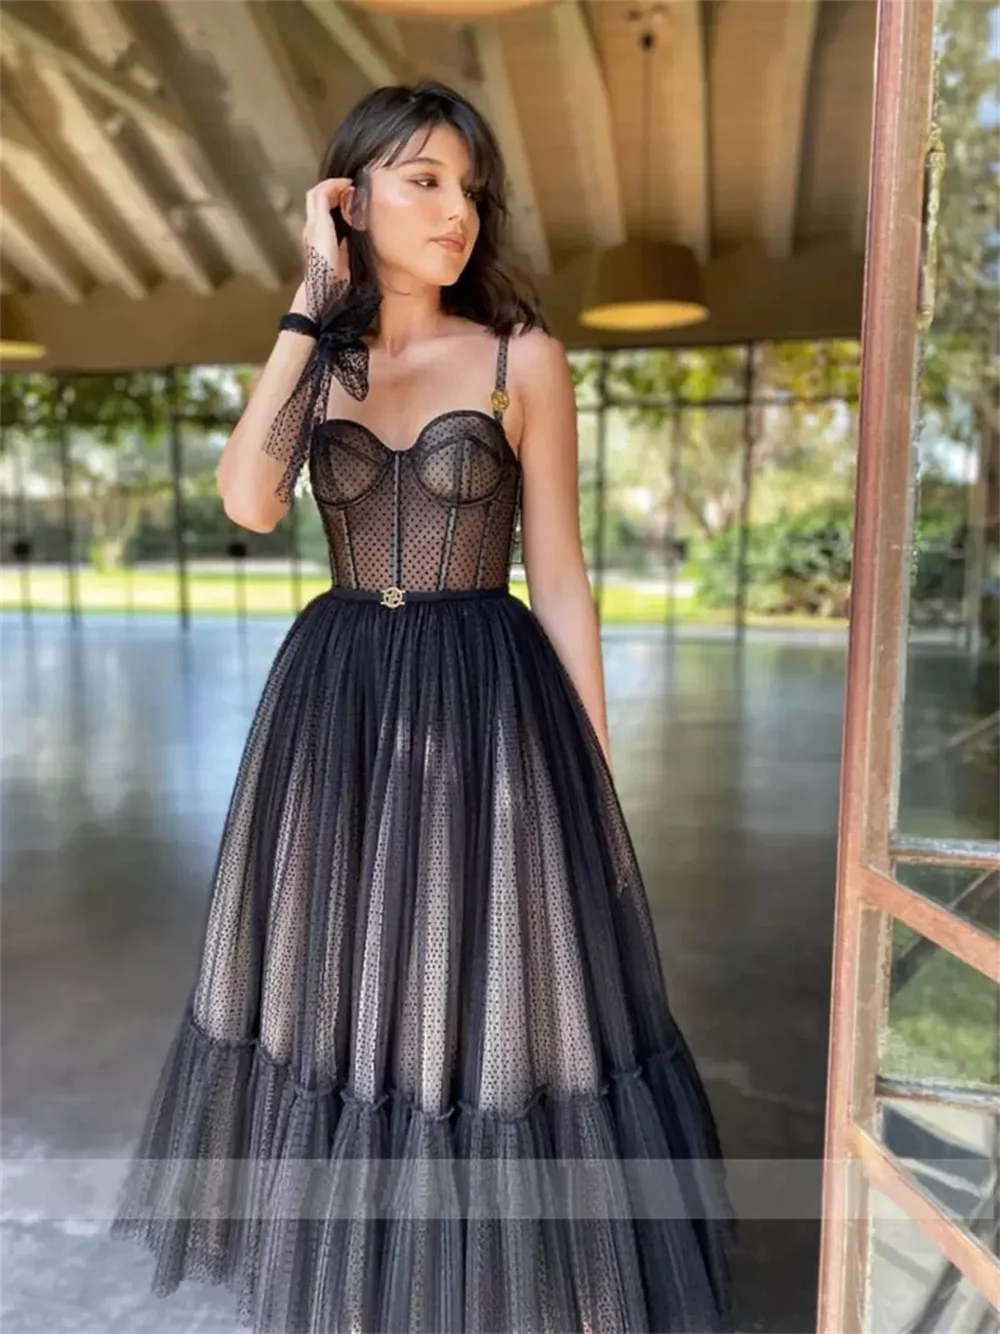 Modern Black Dotted Tulle Short Celebrity Prom Dresses Spaghetti Straps Evening Gowns Sweetheart Corset Cocktail Party فستان